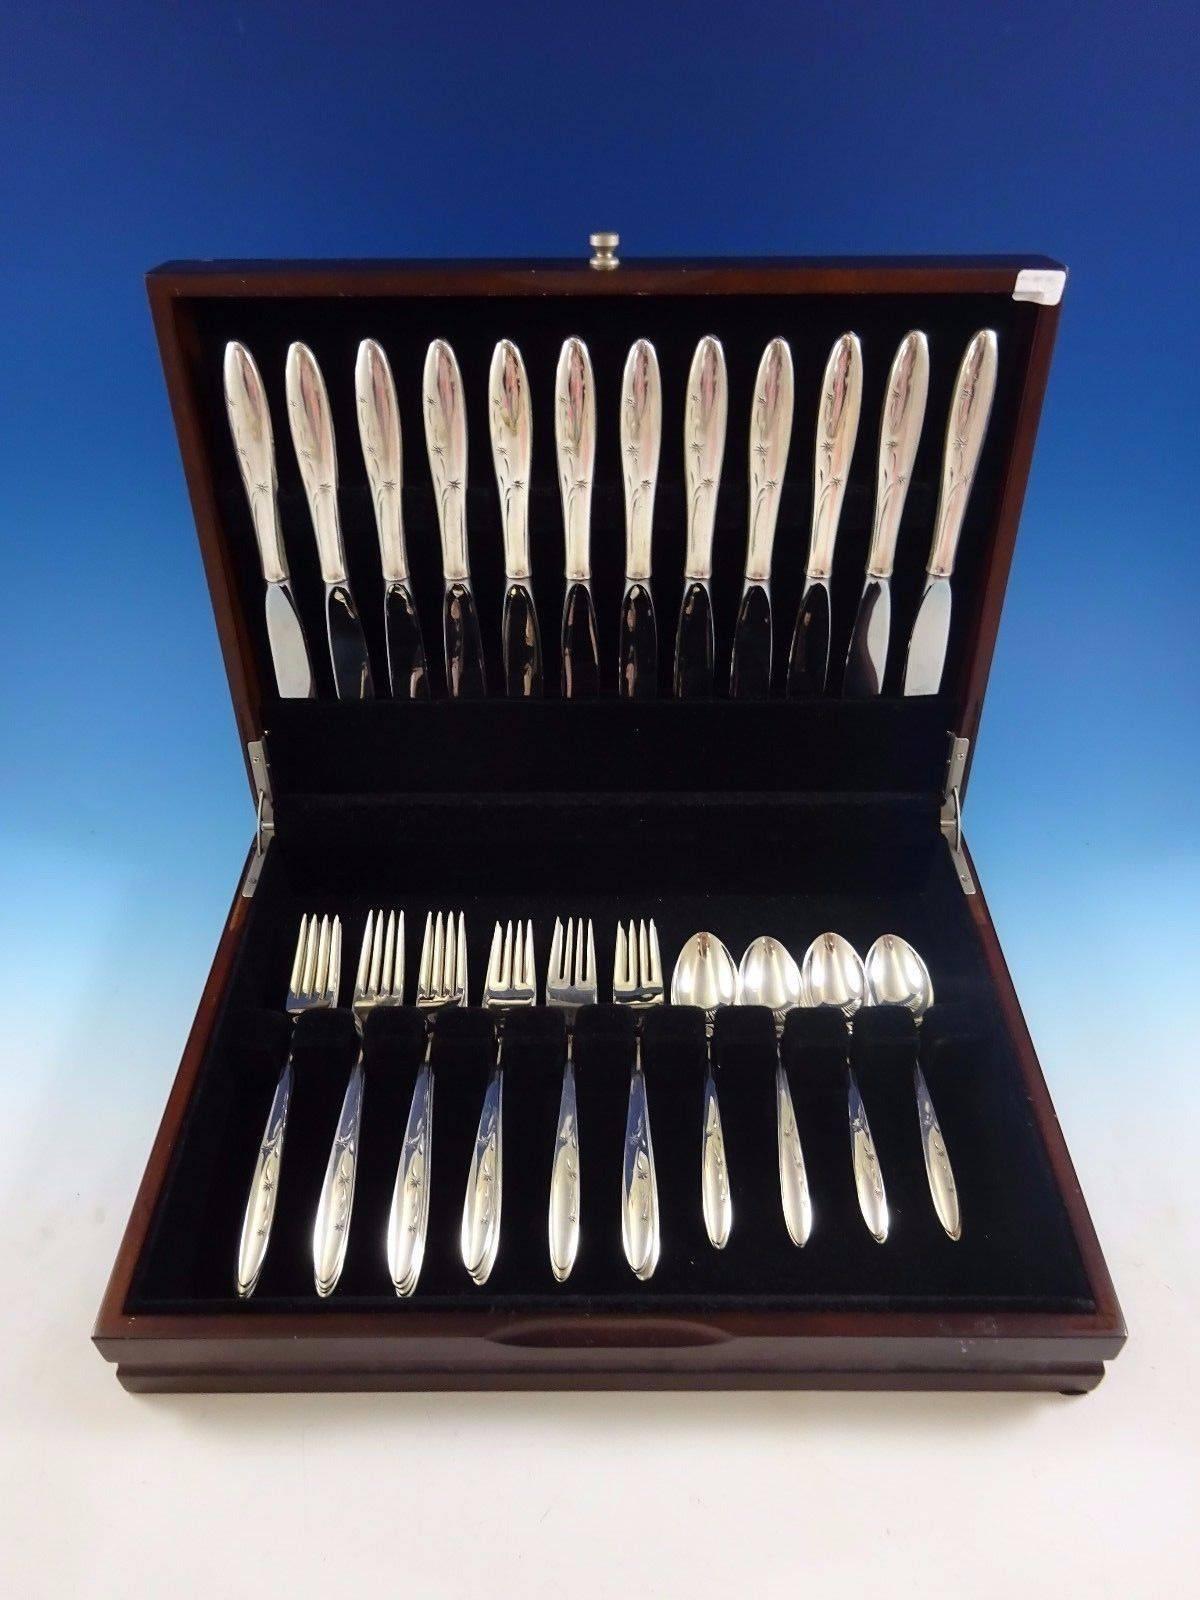 Celeste by Gorham sterling silver flatware set - 48 pieces. This set includes: 

12 knives, 9 1/4